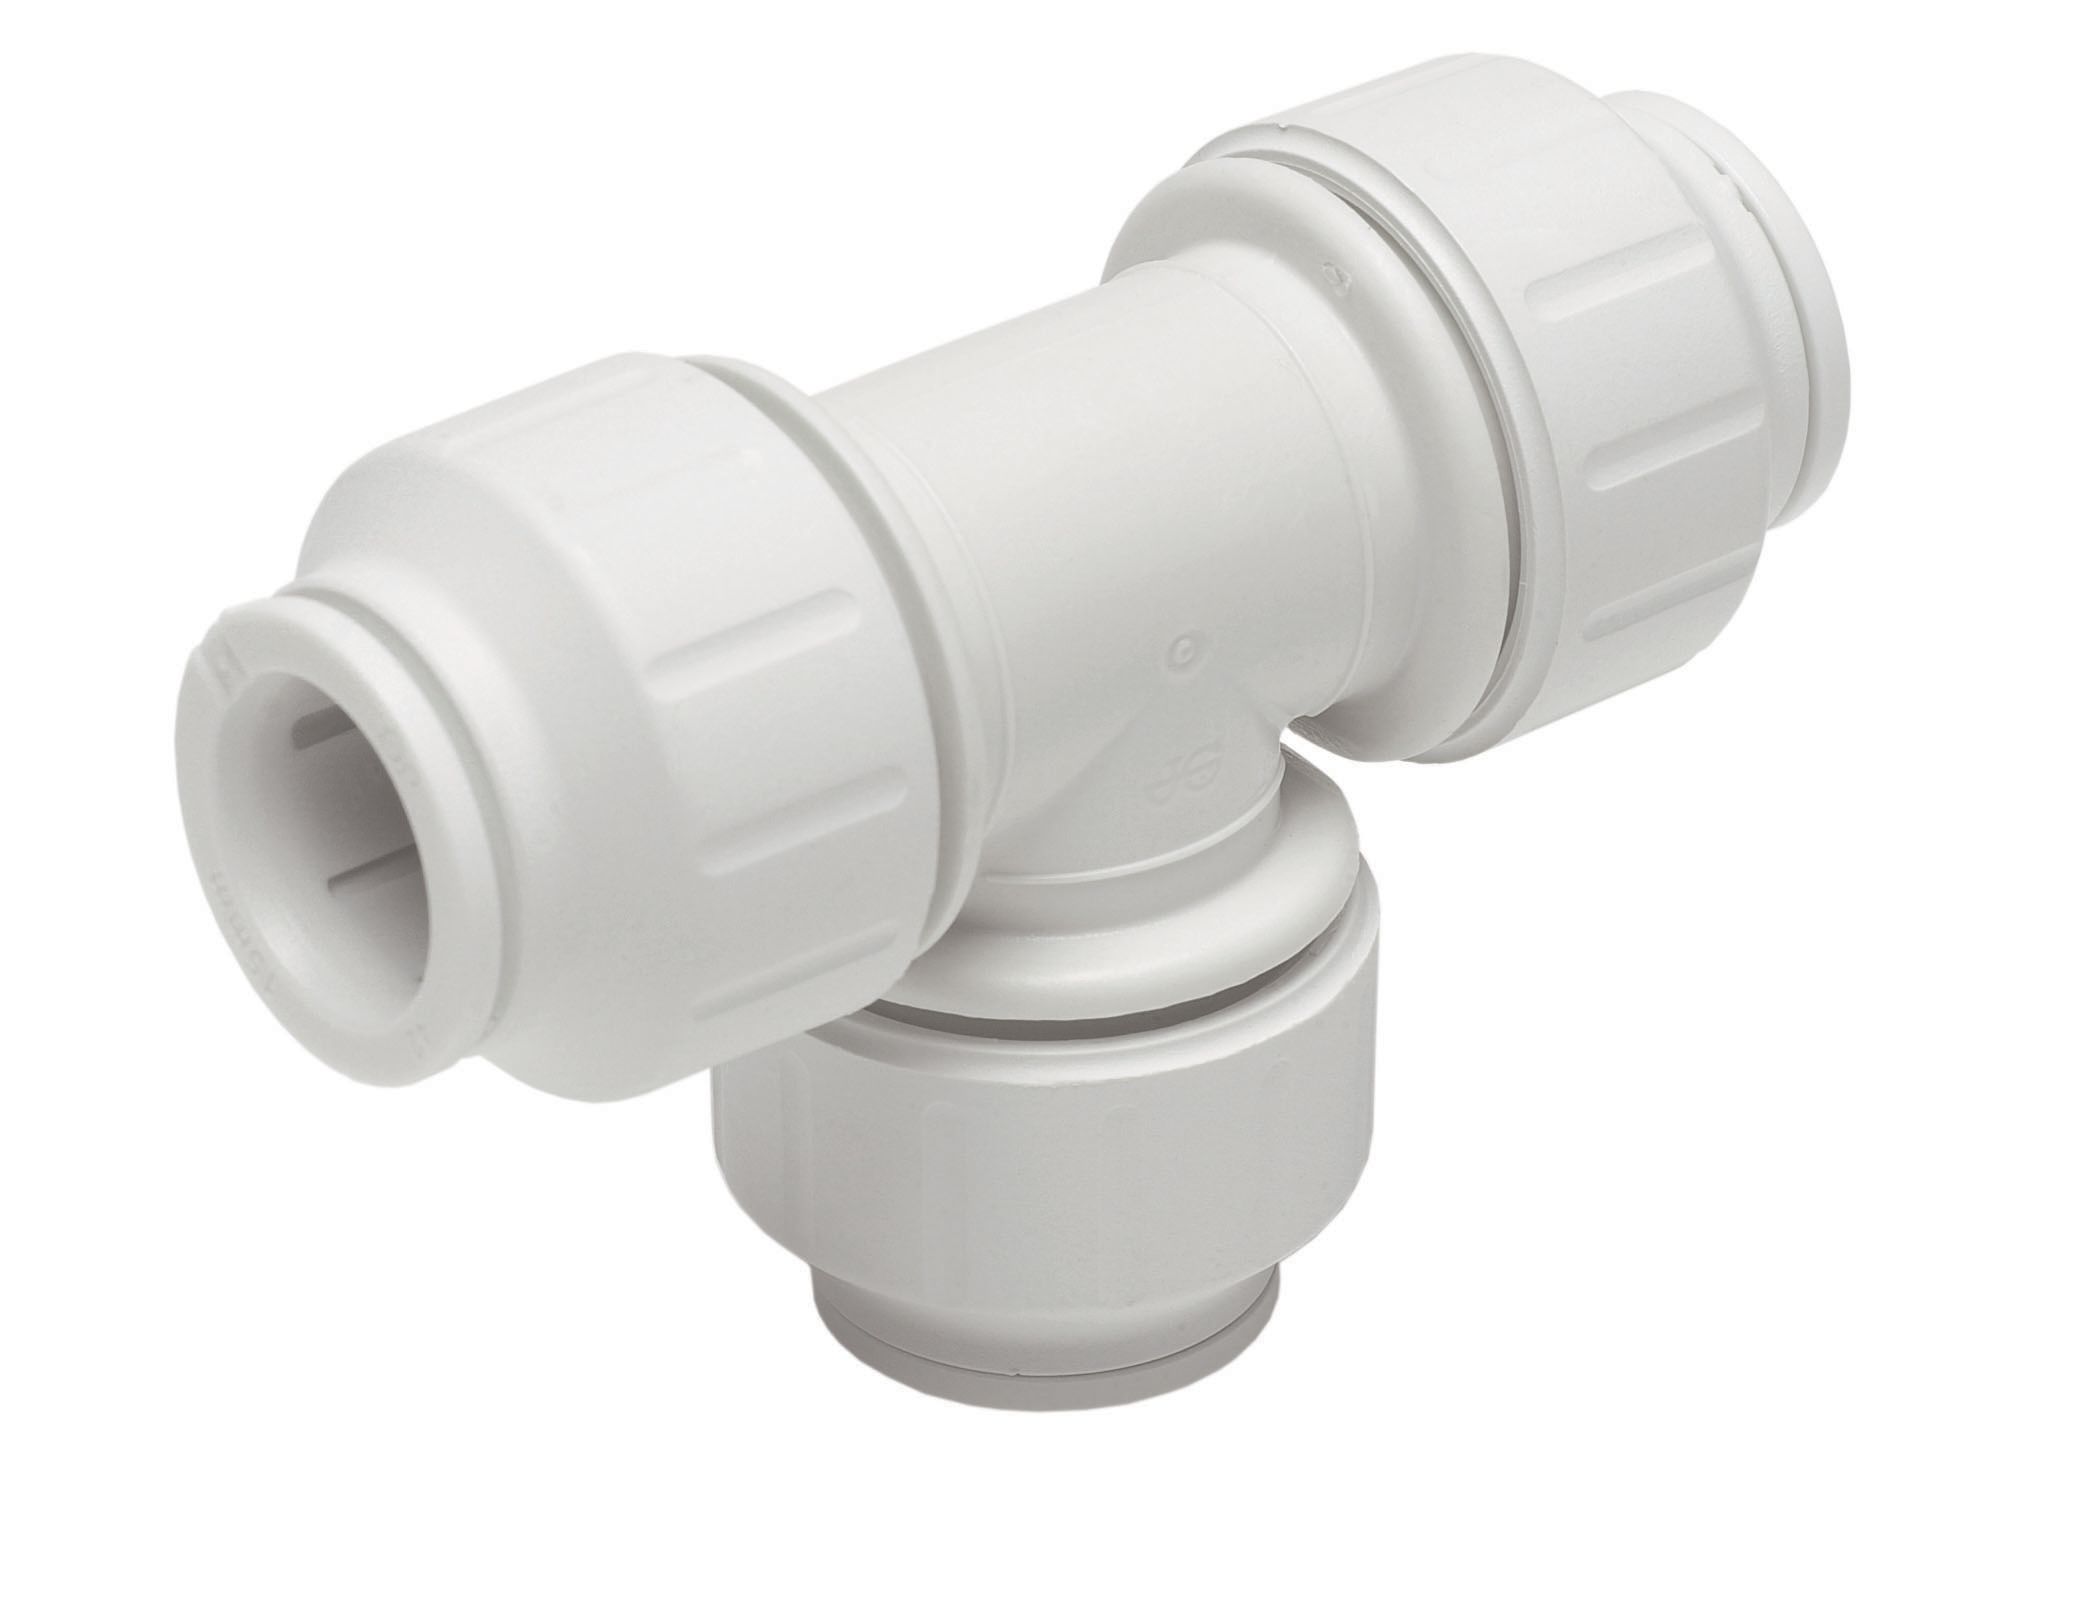 waste pipe fittings malaysia